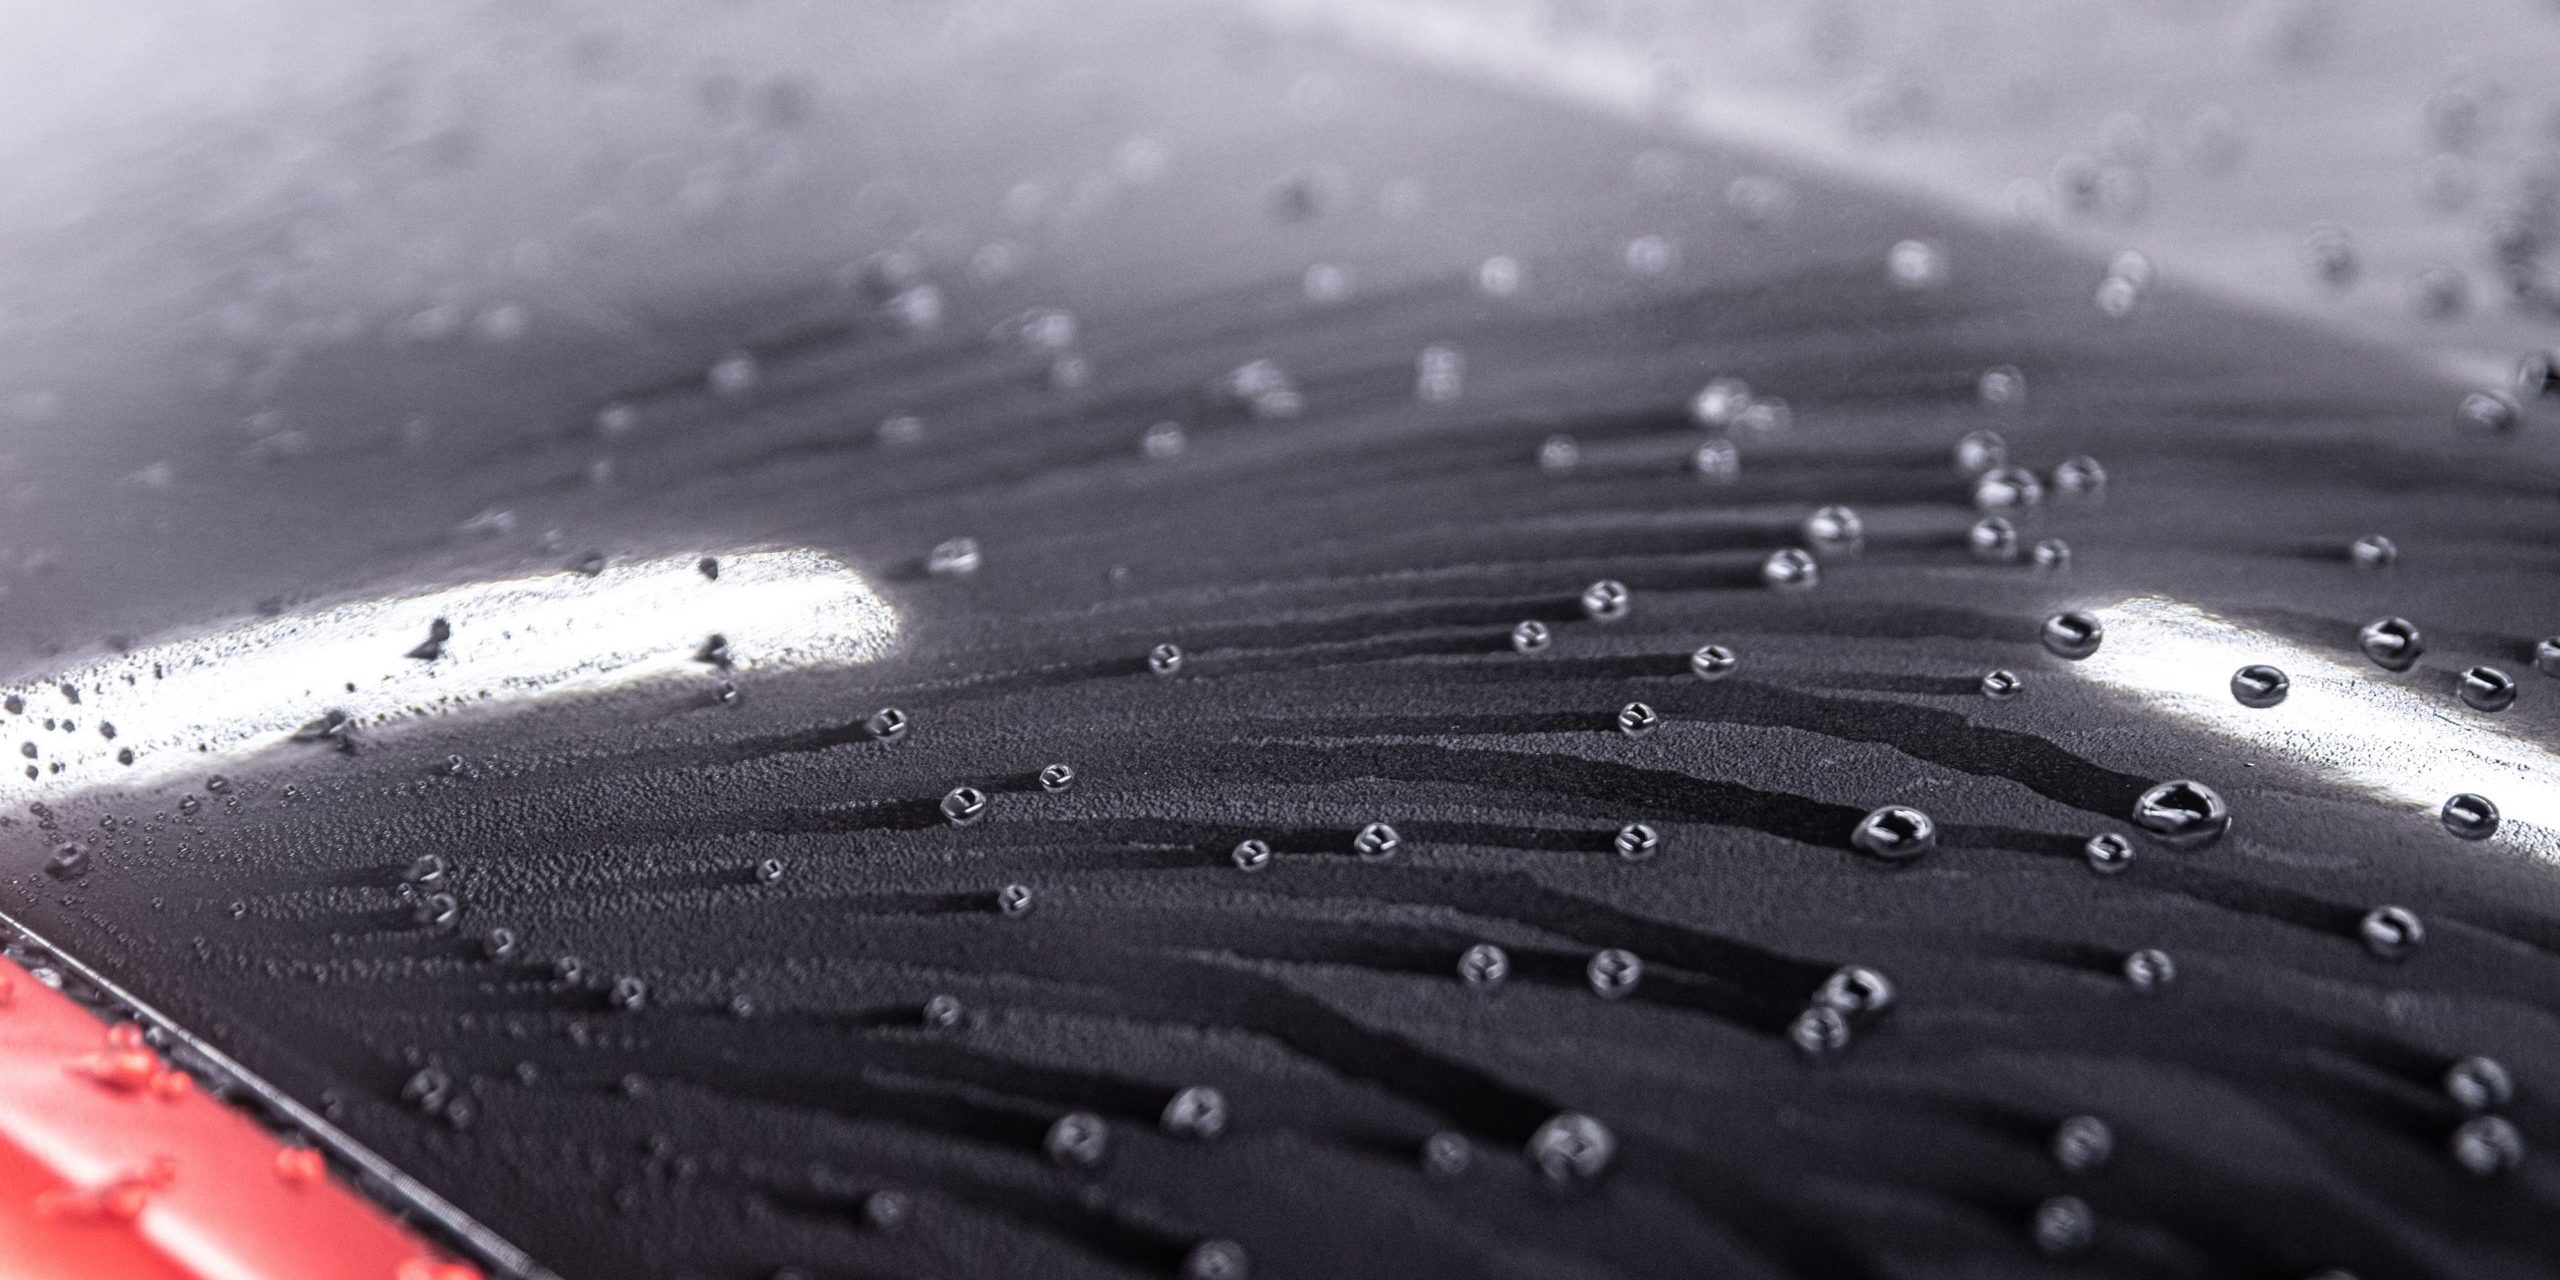 Water drops on car paint. Hydrophobic water effect on car body after using ceramic coating